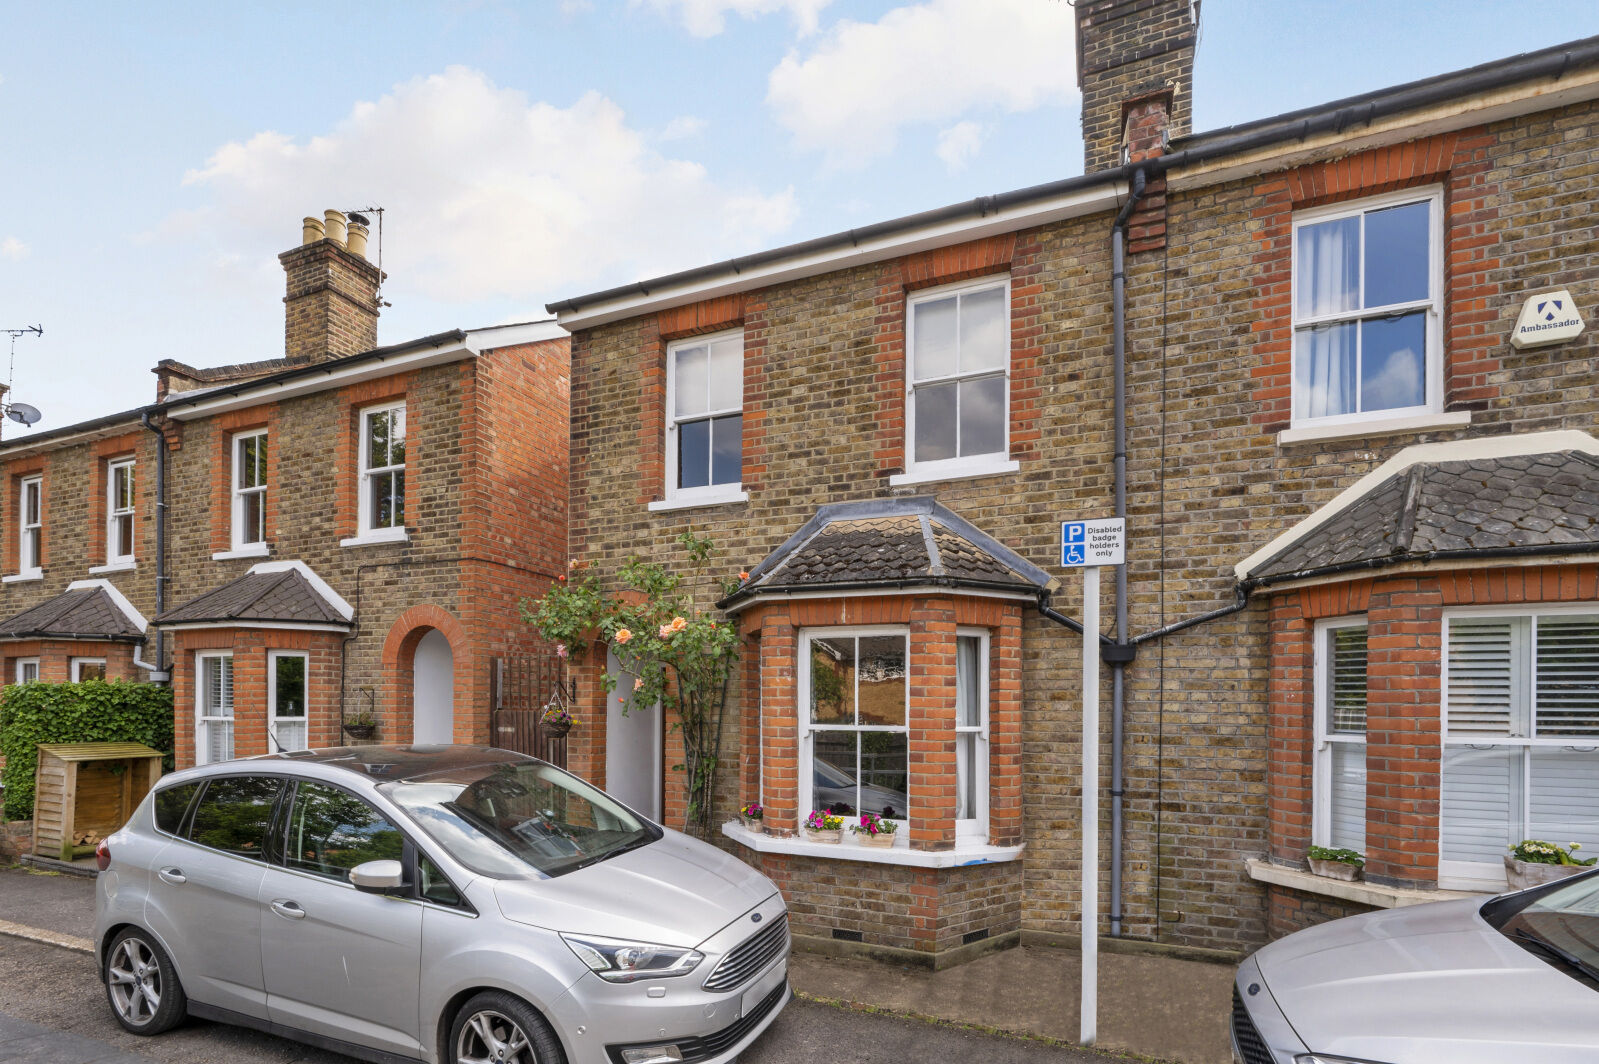 3 bedroom semi detached house for sale Vale Road North, Surbiton, KT6, main image